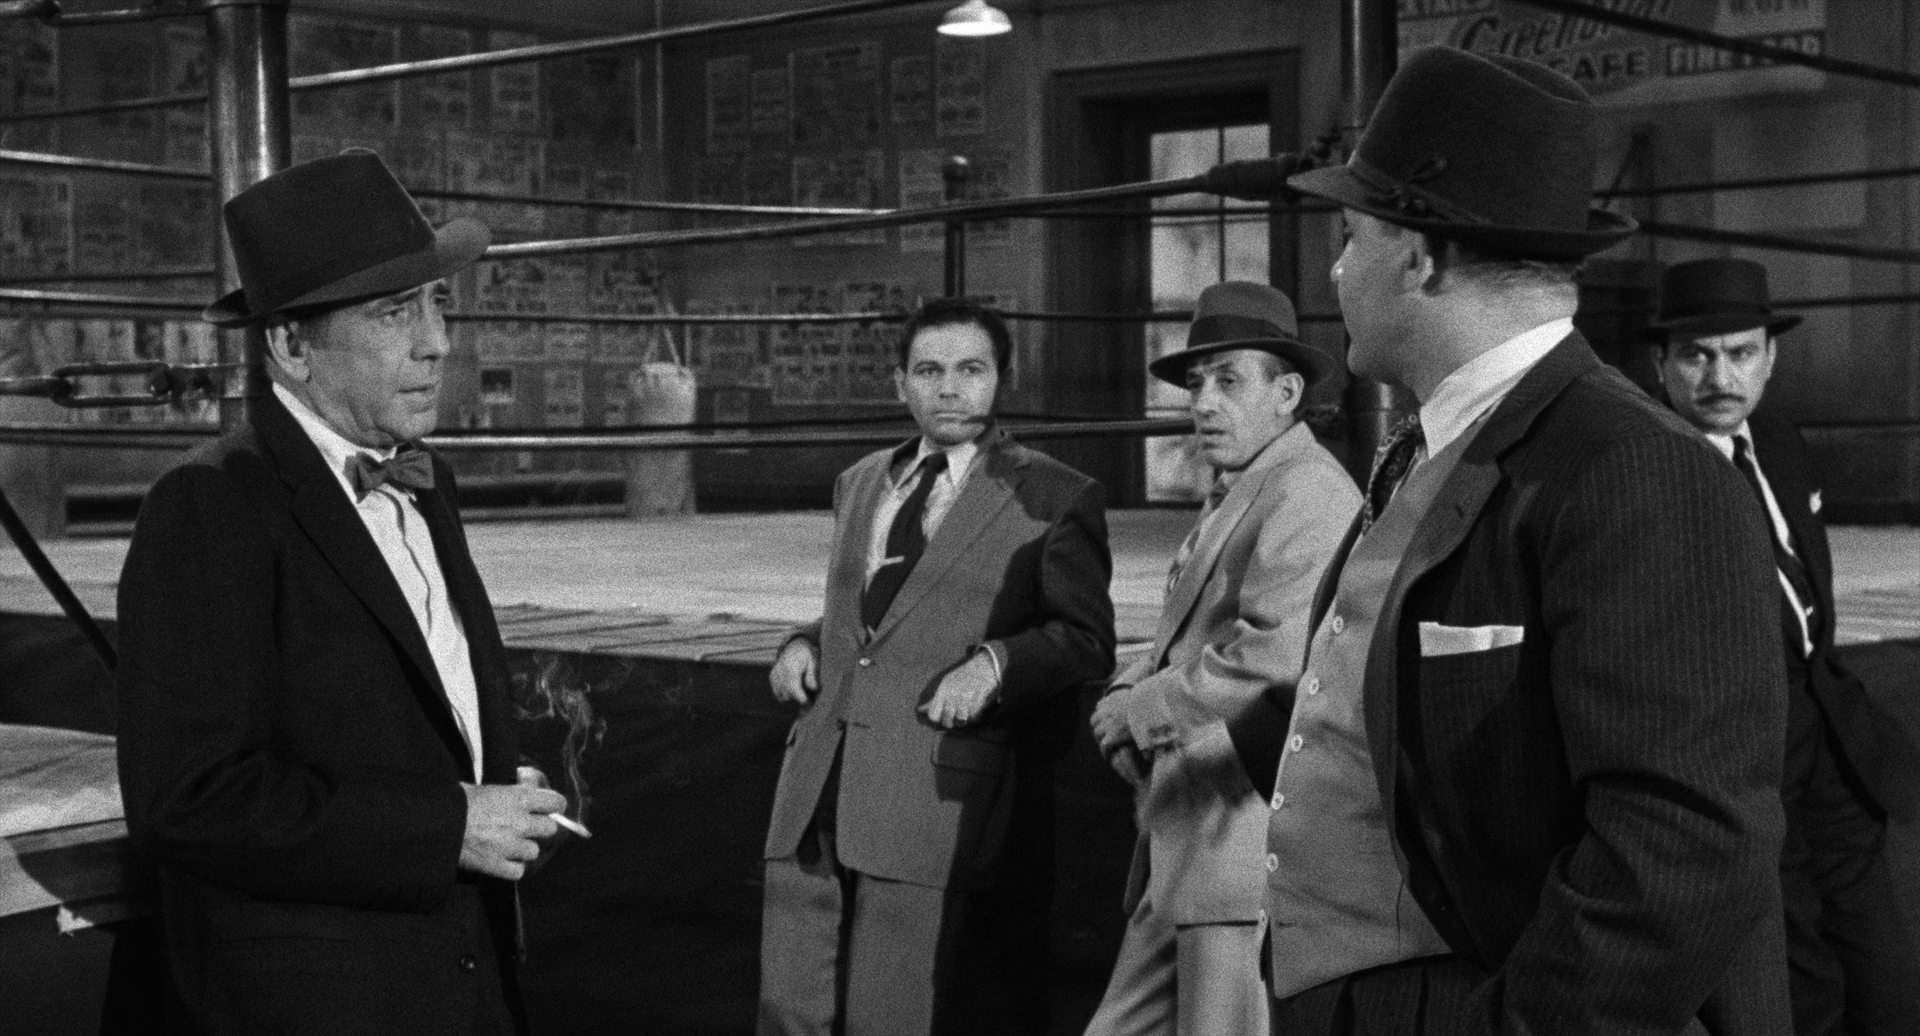 Black-and-white scene: Humphrey Bogart, wearing a hat, bow tie and holding a cigarette, stands at the boxing ring on the left of the picture, talking to Rod Steiger as a boxing promoter; there are also three dodgy men at the ring.